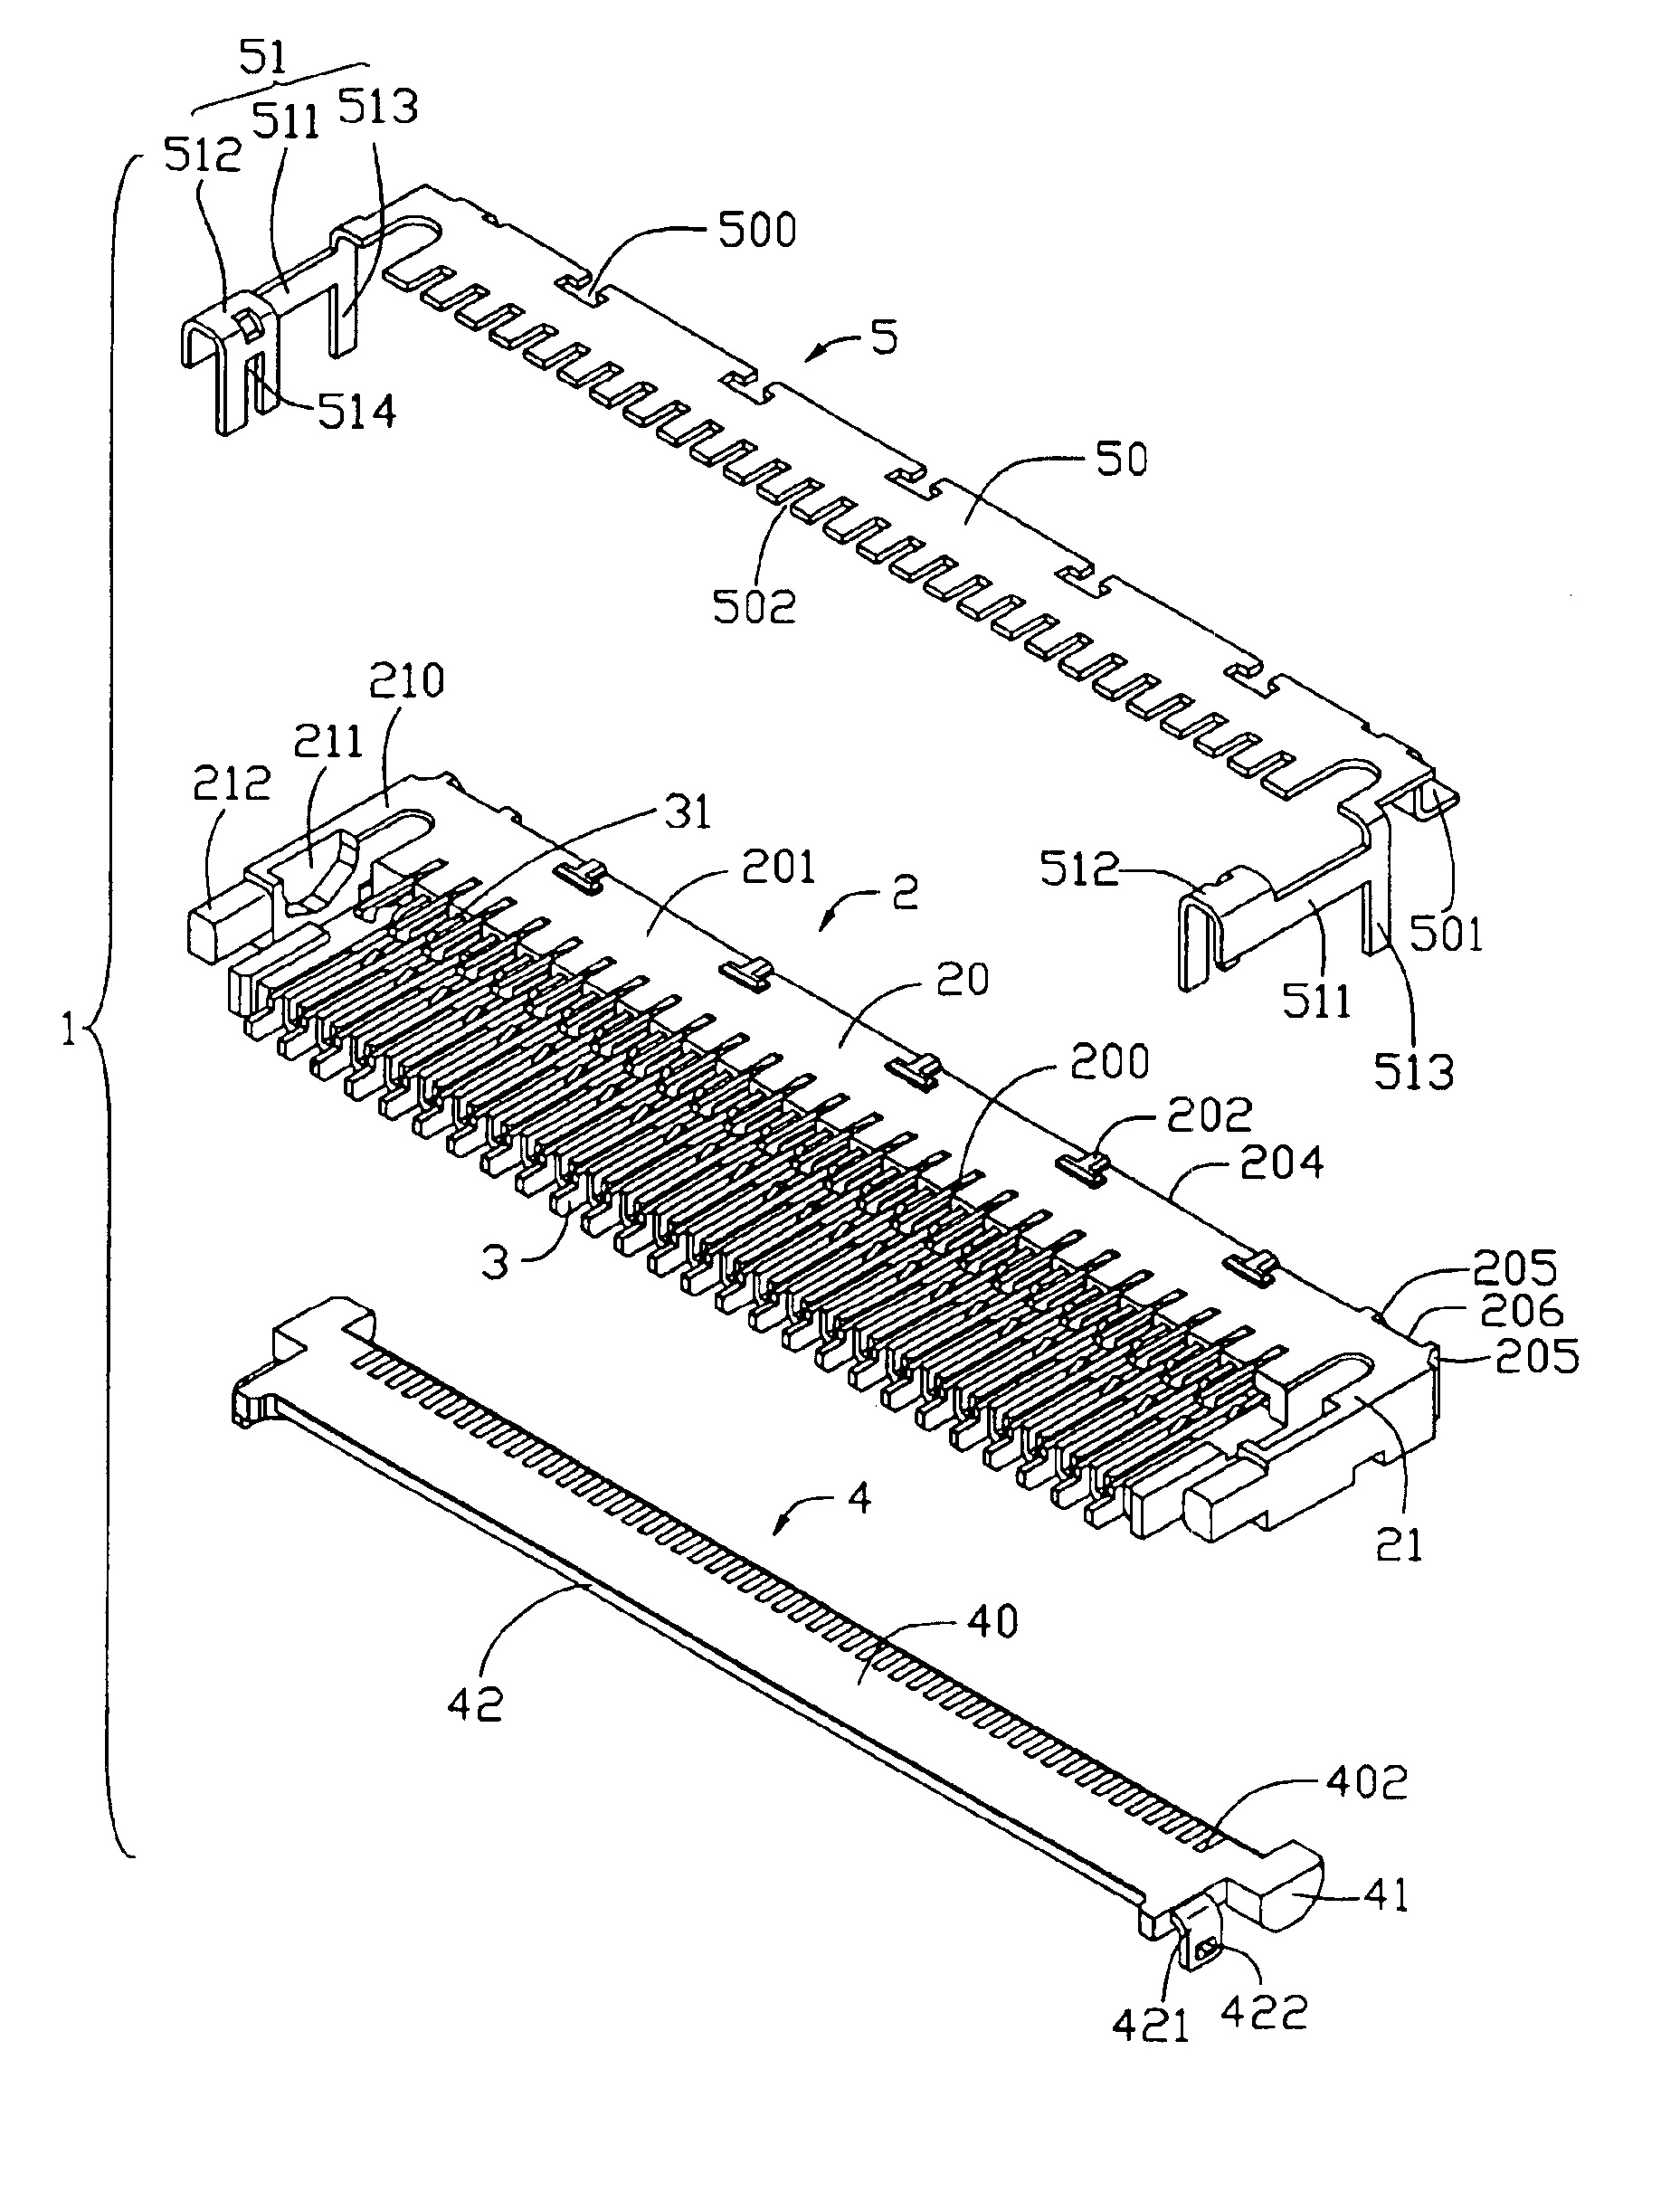 Electrical connector for flexible printed circuit board